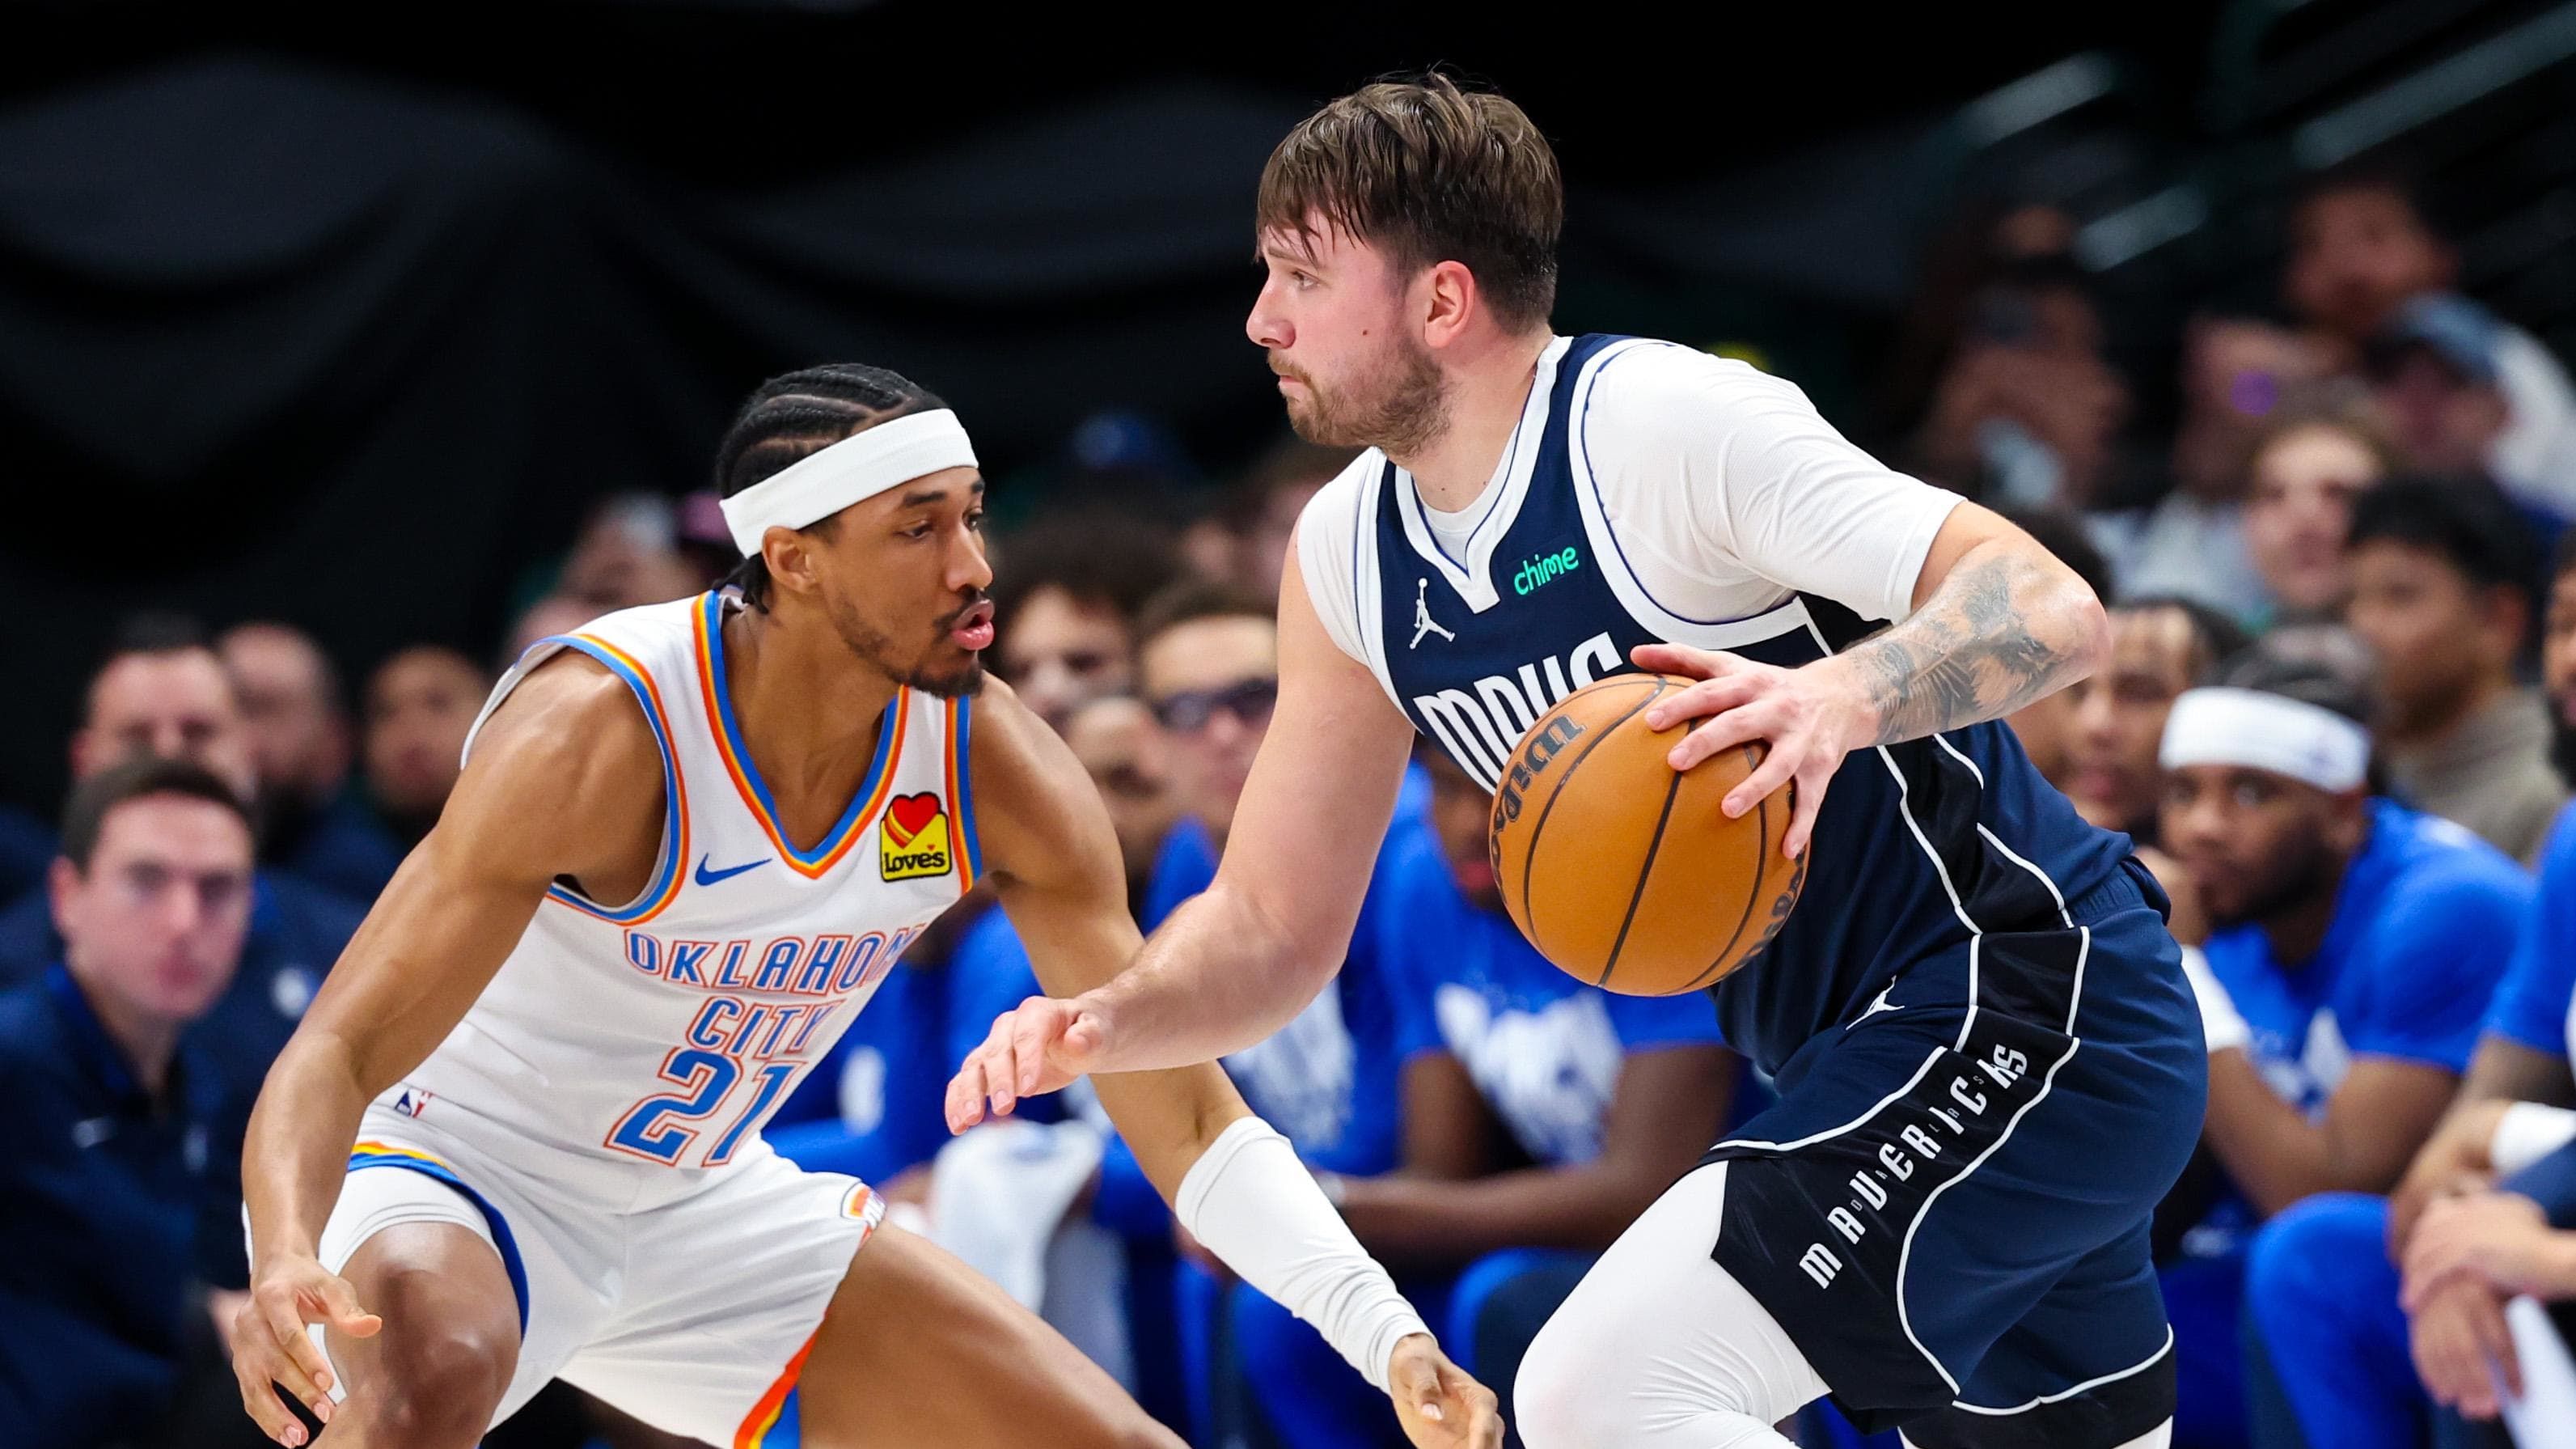 Dallas Mavericks vs. OKC Thunder: Preview, Where to Watch and Betting Odds